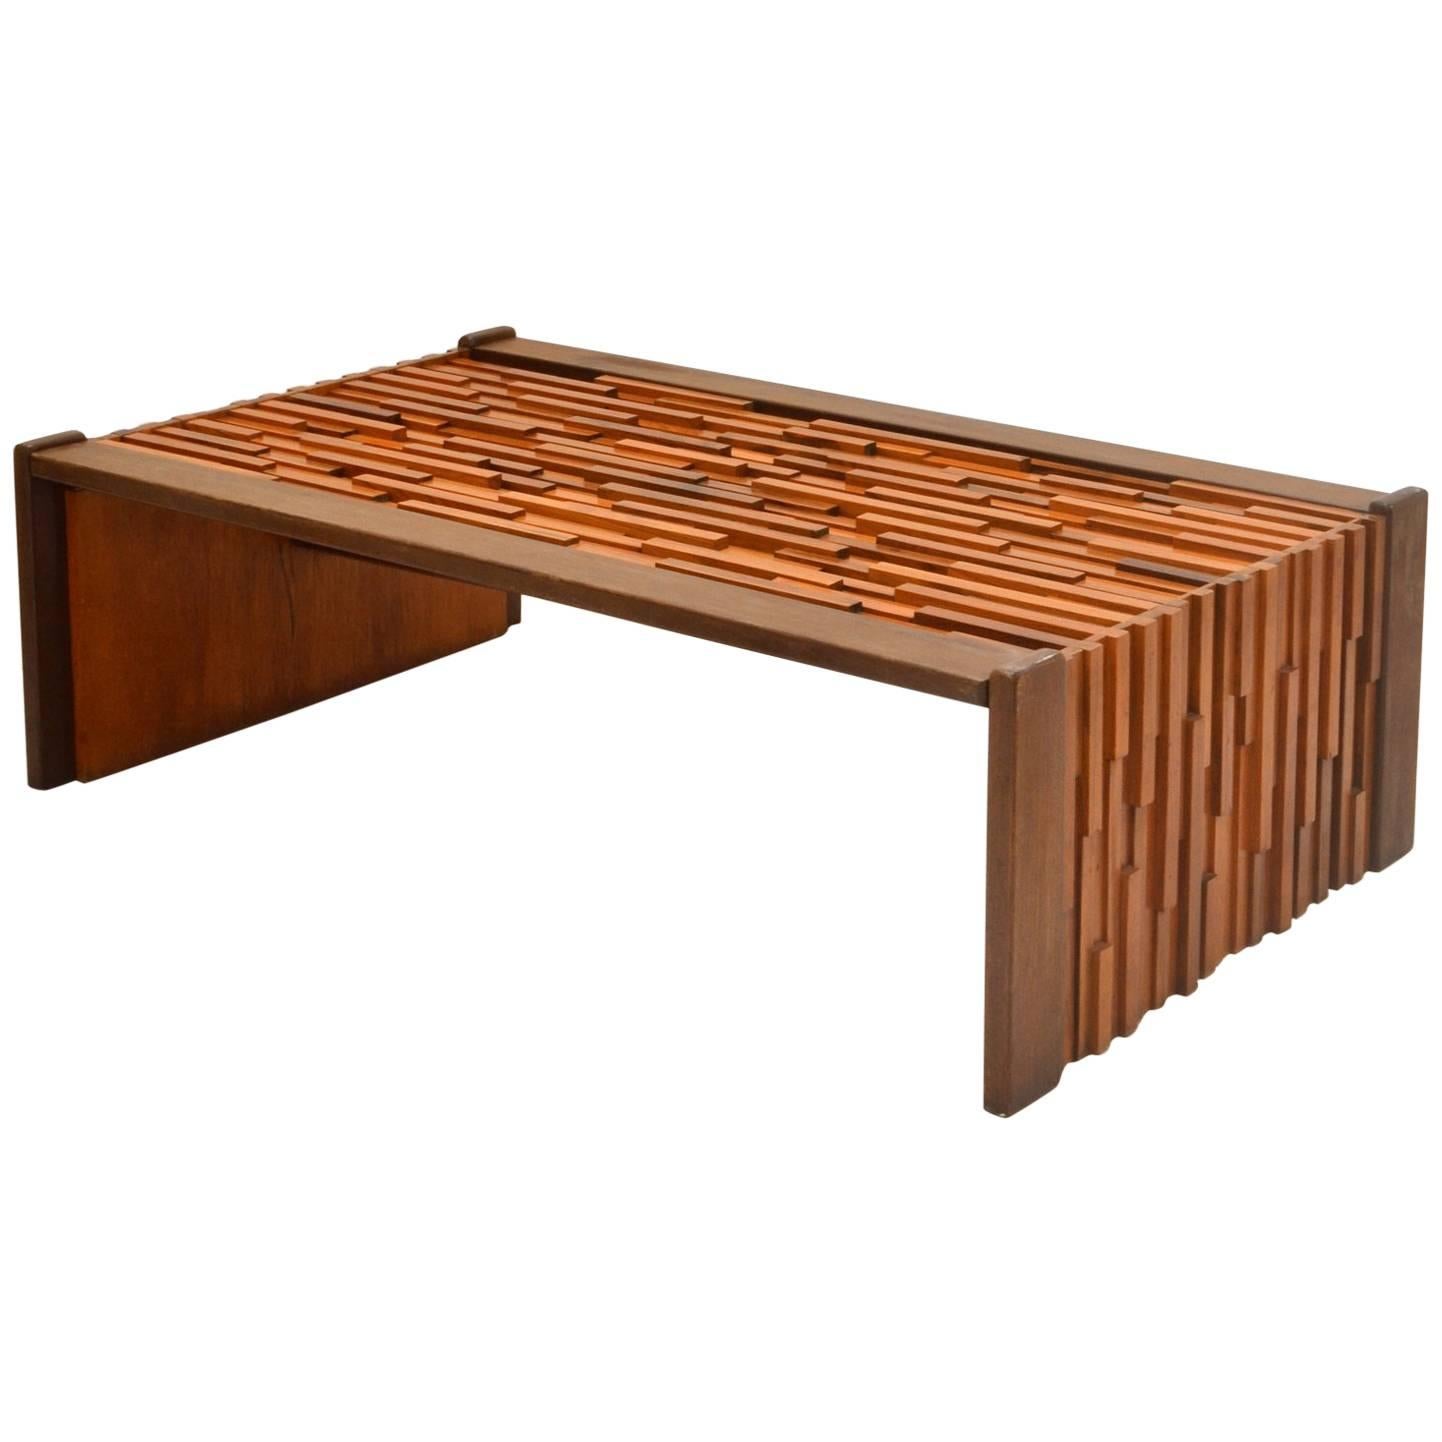 1960s Brutalist Coffee Table in Brazilian Hard Wood Relief by Percifal Lafer